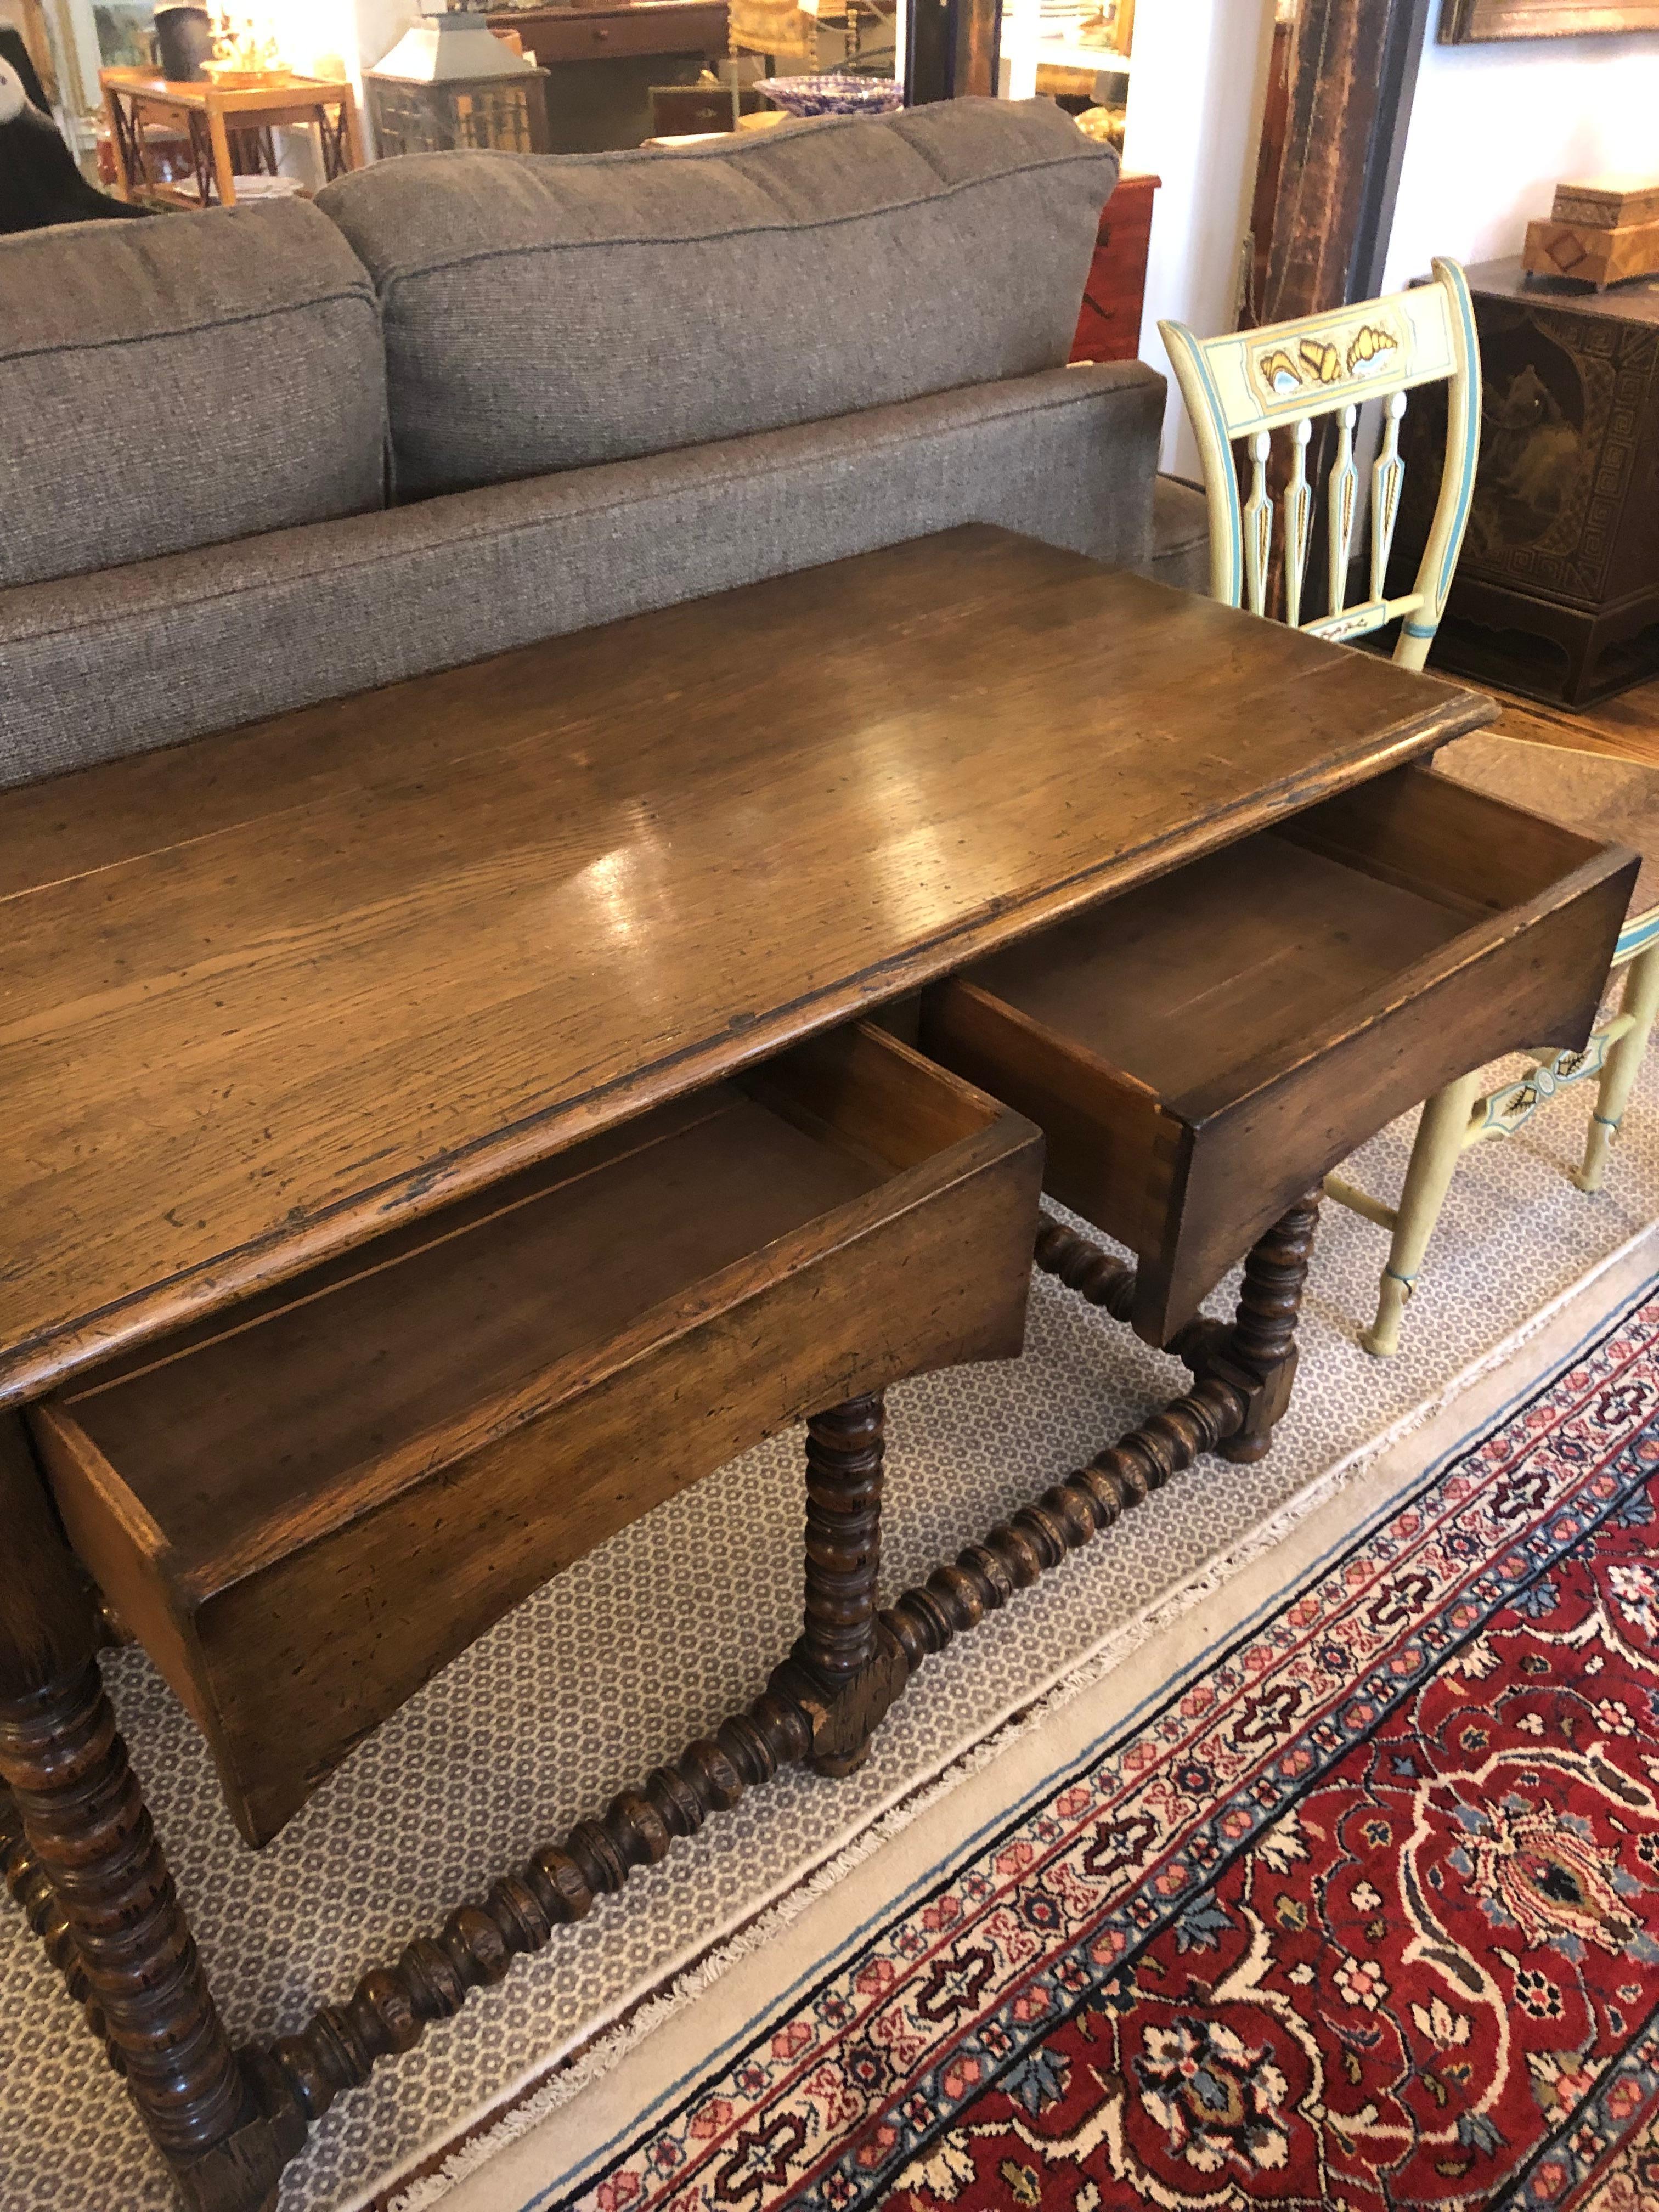 Very handsome masculine rich oak console having two drawers, finished front and back, and beautiful barley twist base. Makes a great table behind a sofa.